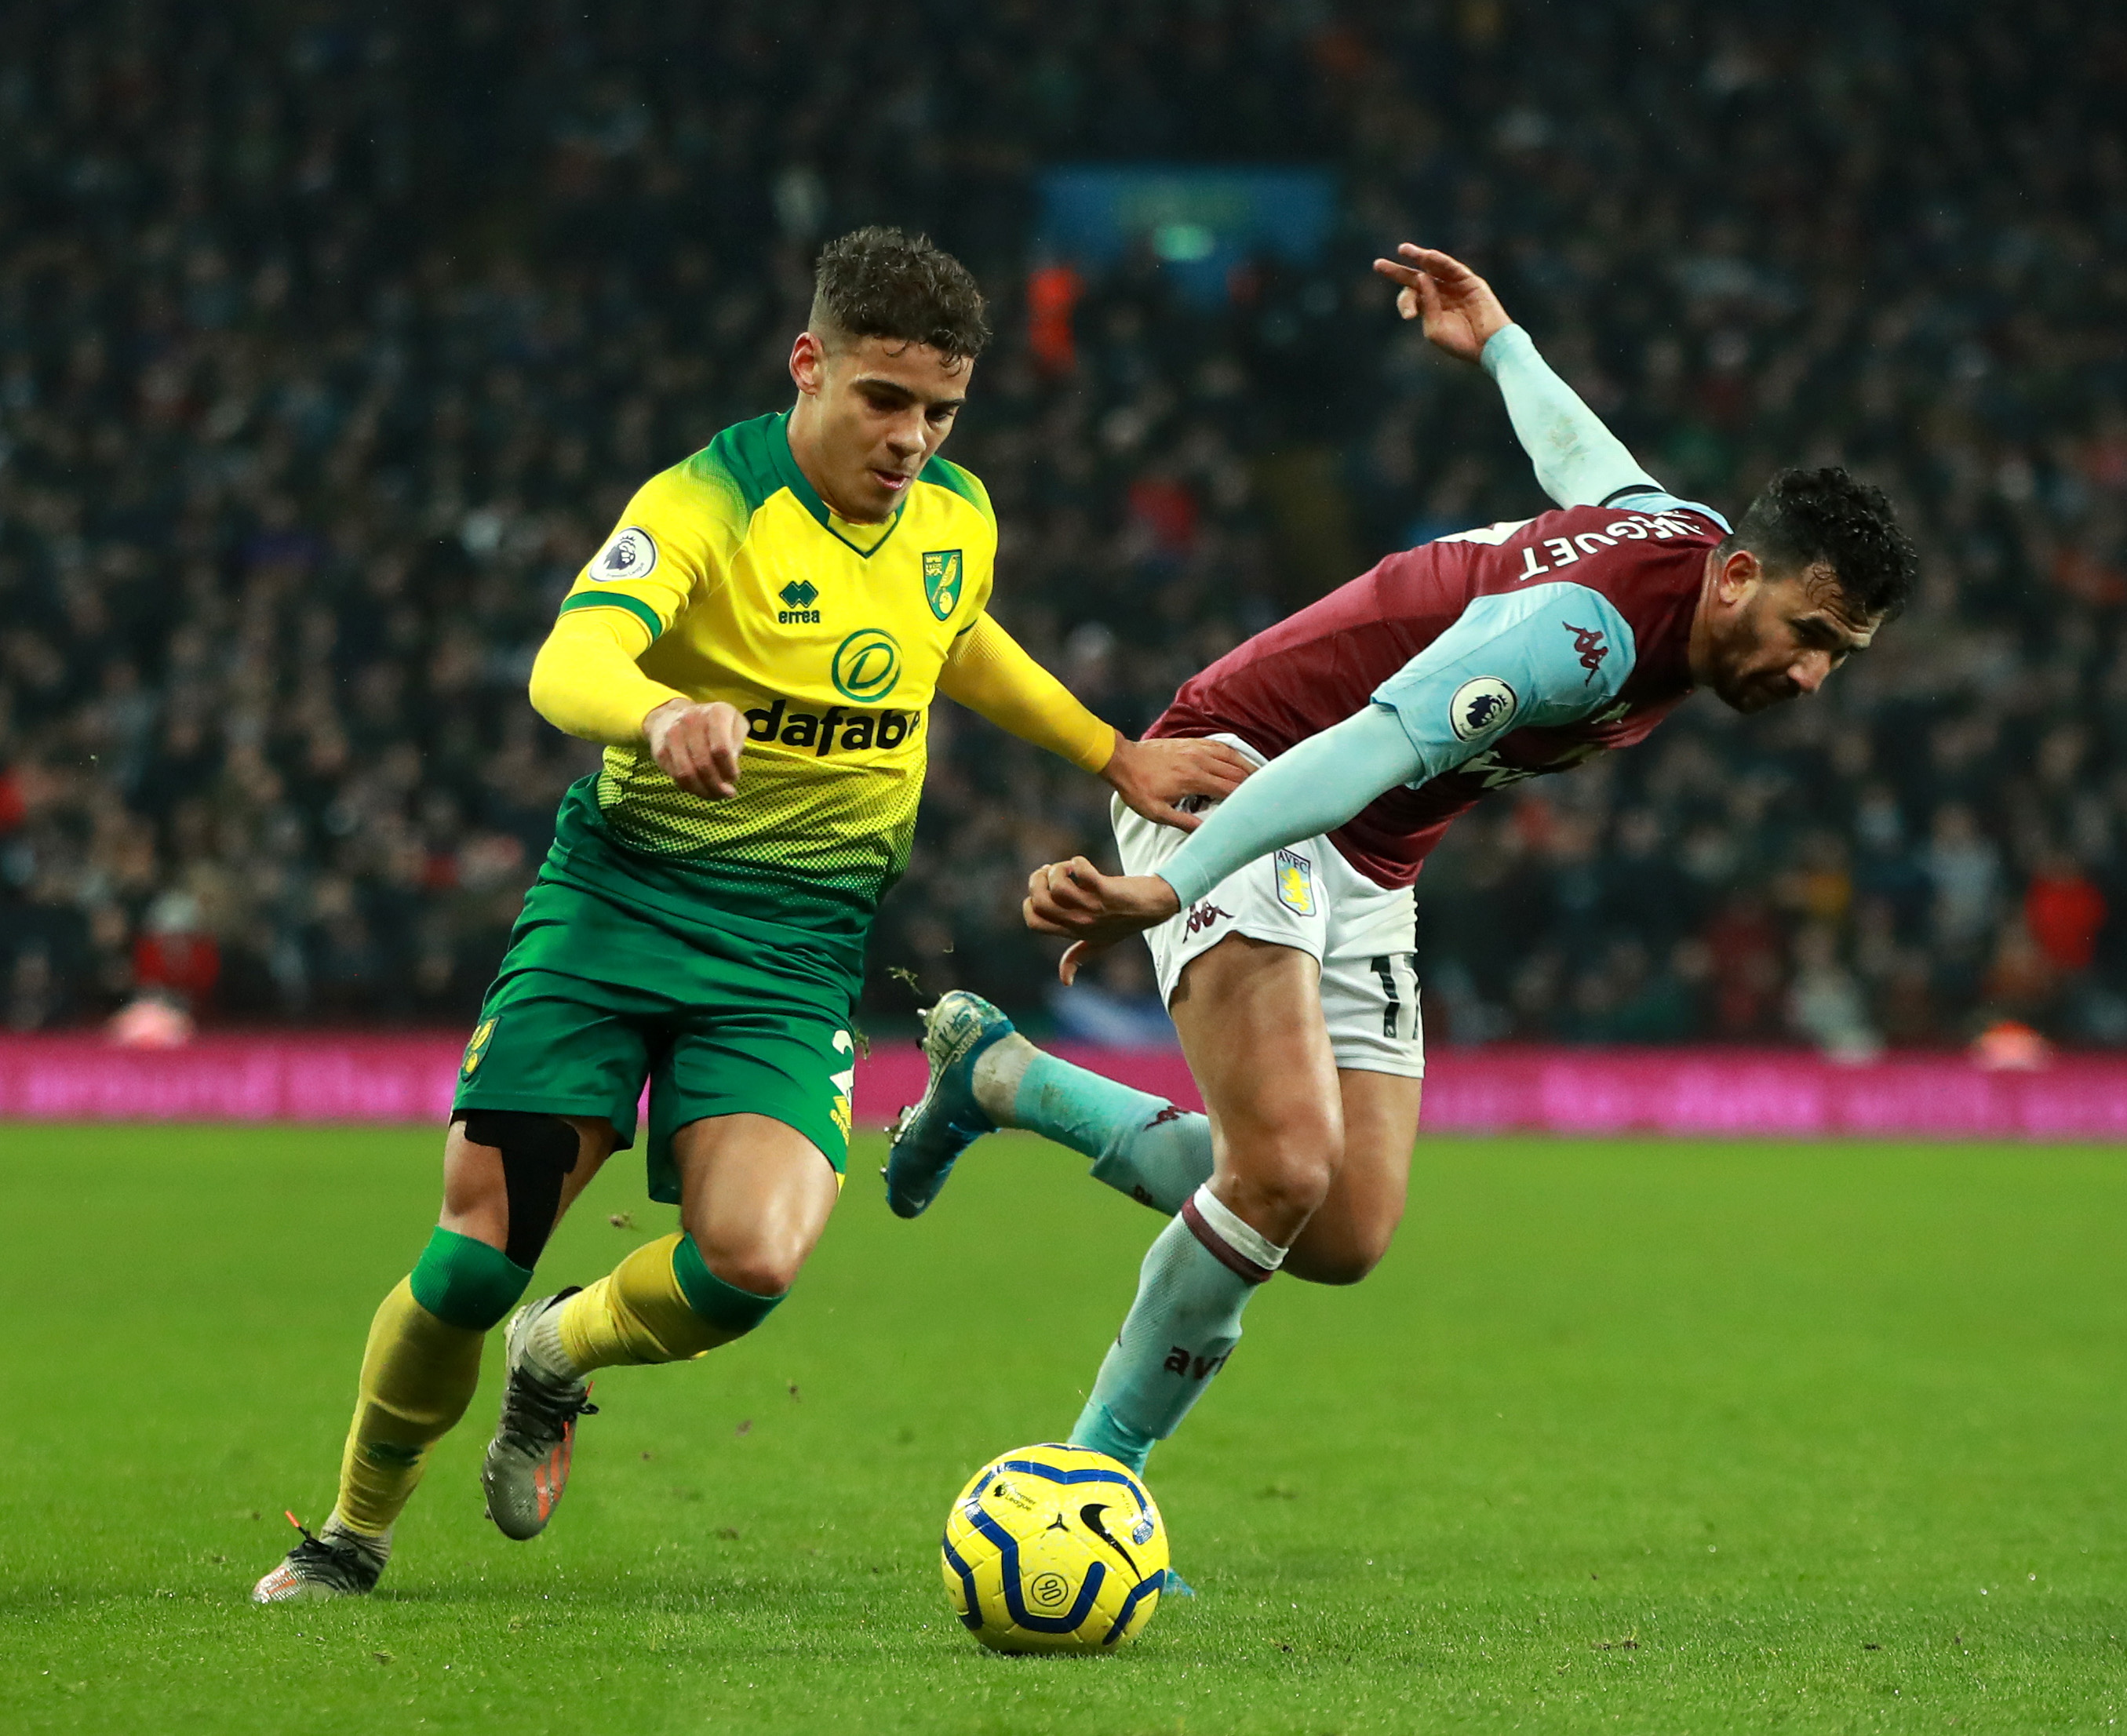 BIRMINGHAM, ENGLAND - DECEMBER 26: Max Aarons of Norwich City takes on Trezeguet during the Premier League match between Aston Villa and Norwich City at Villa Park on December 26, 2019 in Birmingham, United Kingdom. (Photo by David Rogers/Getty Images)